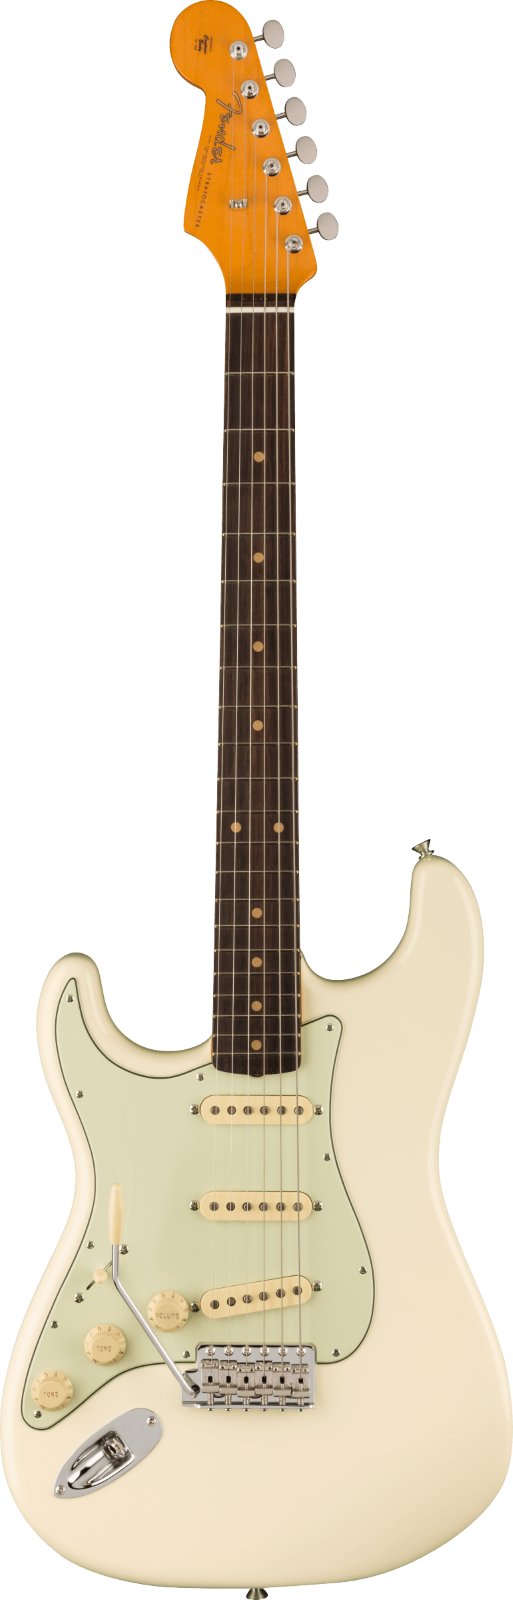 Fender American Vintage II 1961 Stratocaster Left-Hand, Rosewood Fingerboard, Olympic White : miniature 1